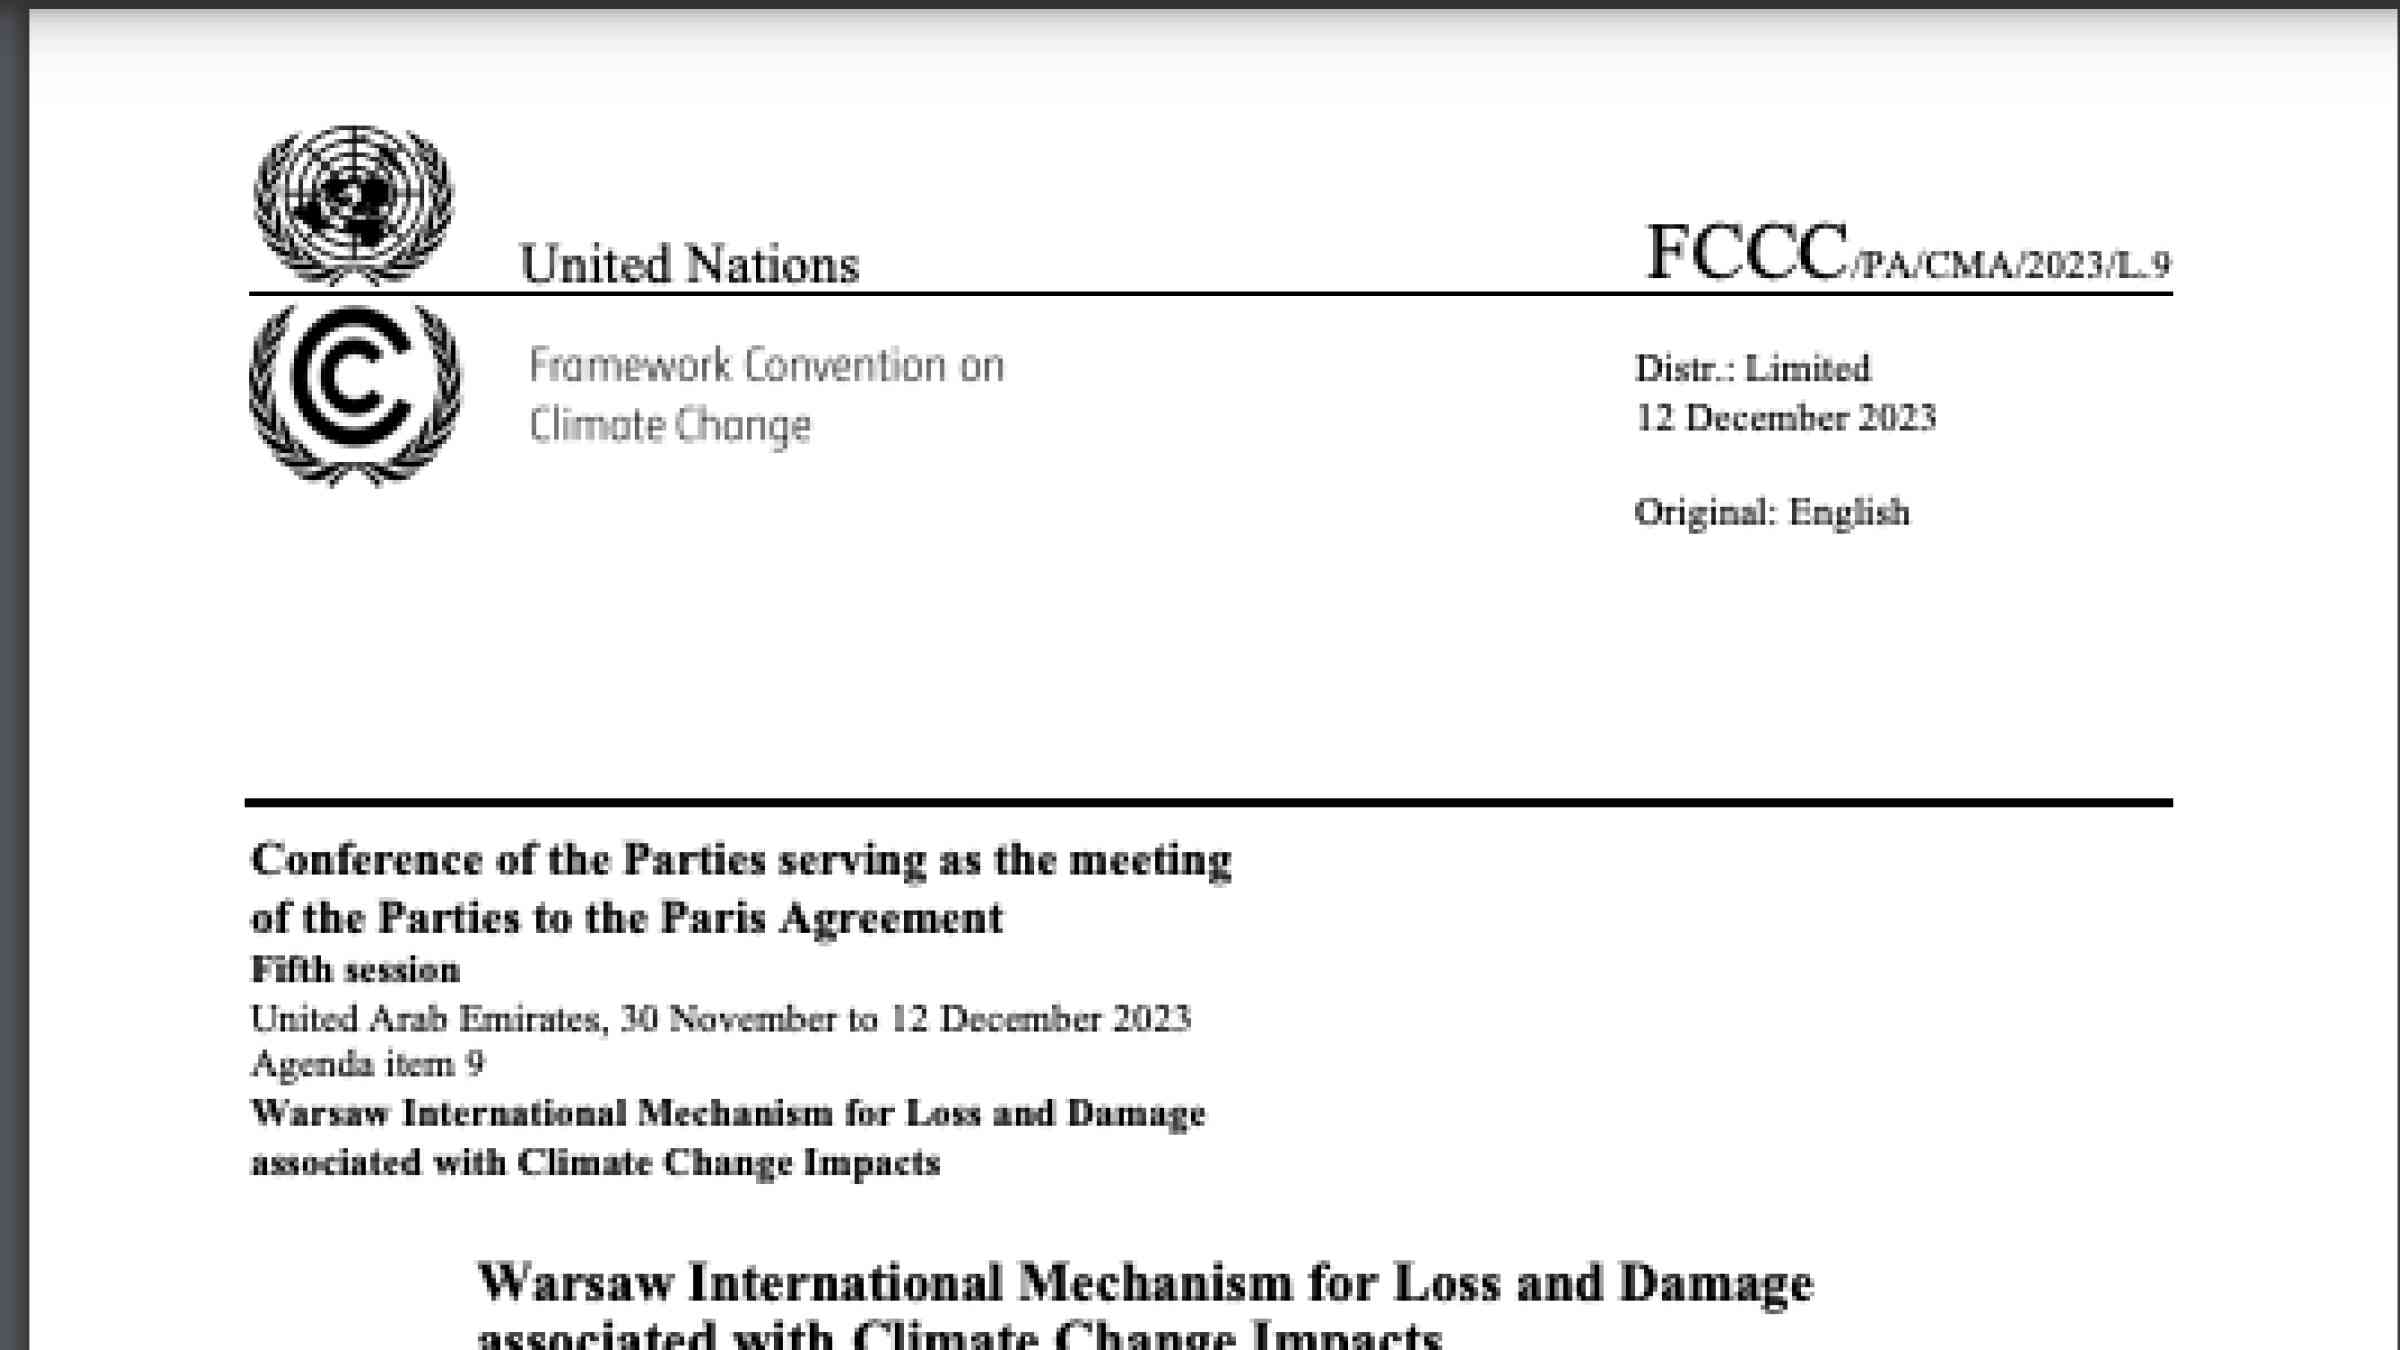 Santiago network for averting, minimizing and addressing loss and damage under the Warsaw International Mechanism for Loss and Damage associated with Climate Change Impacts